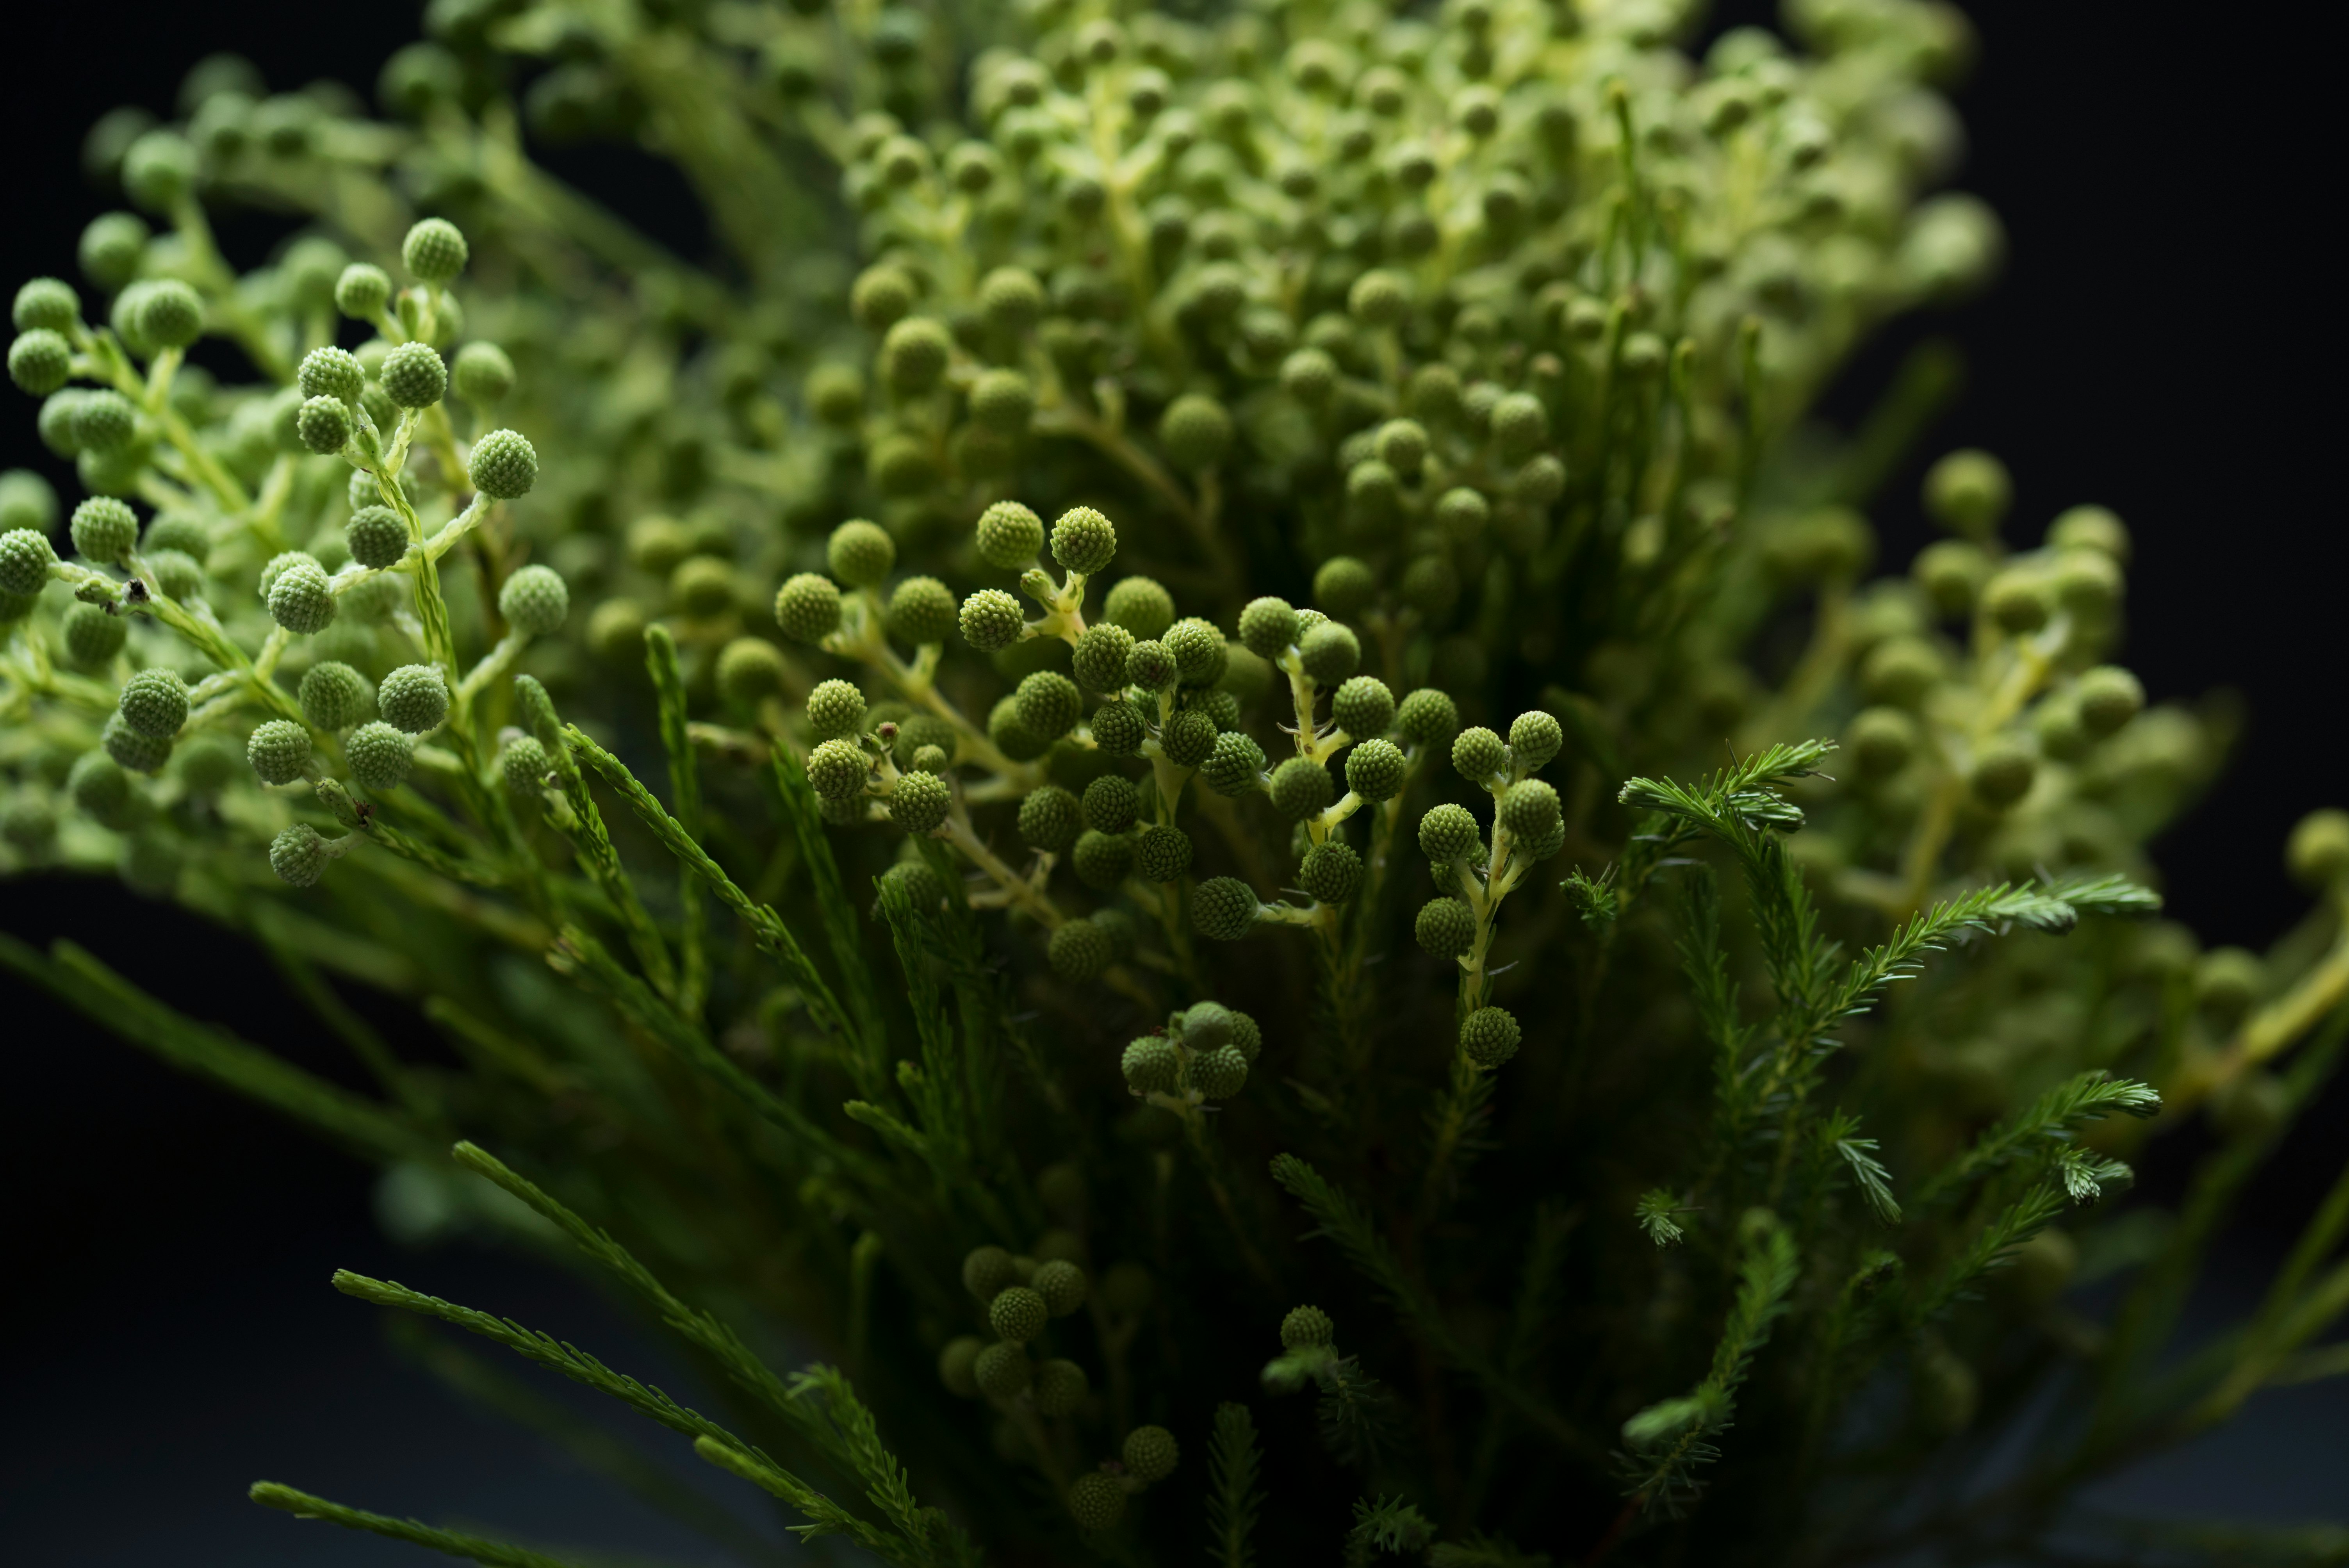 macro photography of green leafed plant